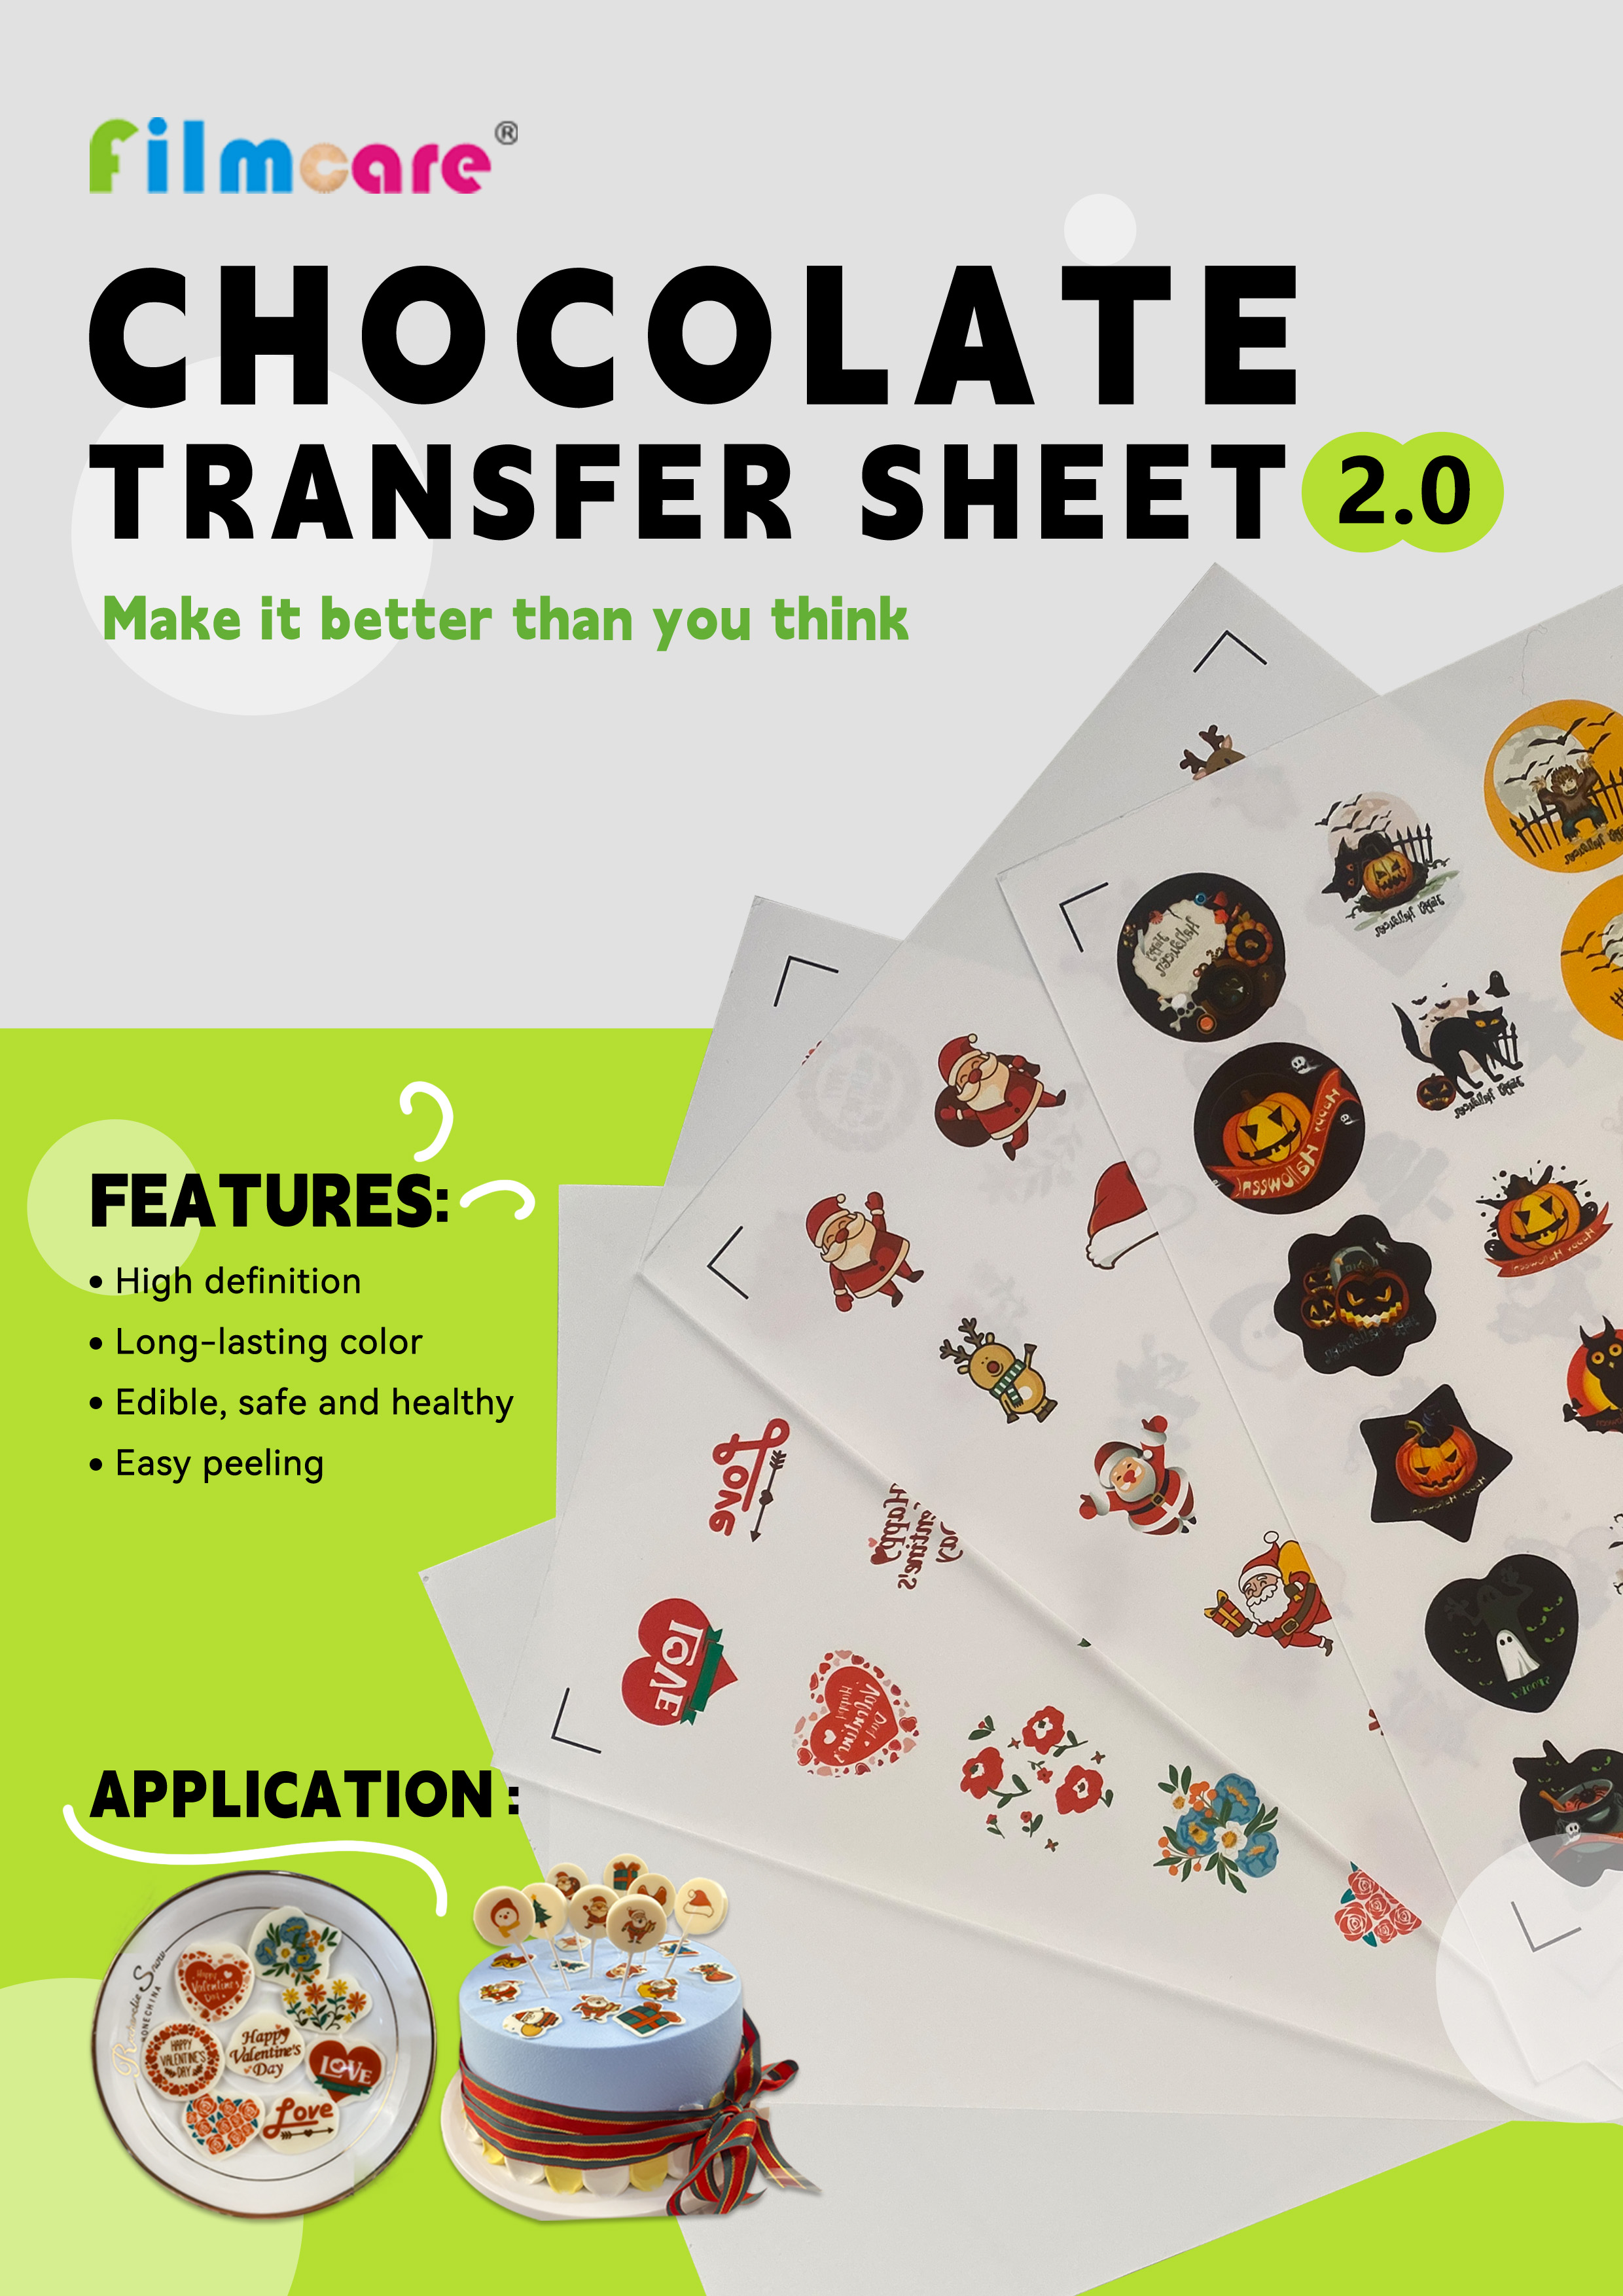 CHOCOLATE TRANSFER SHEET 2.0 is coming soon!